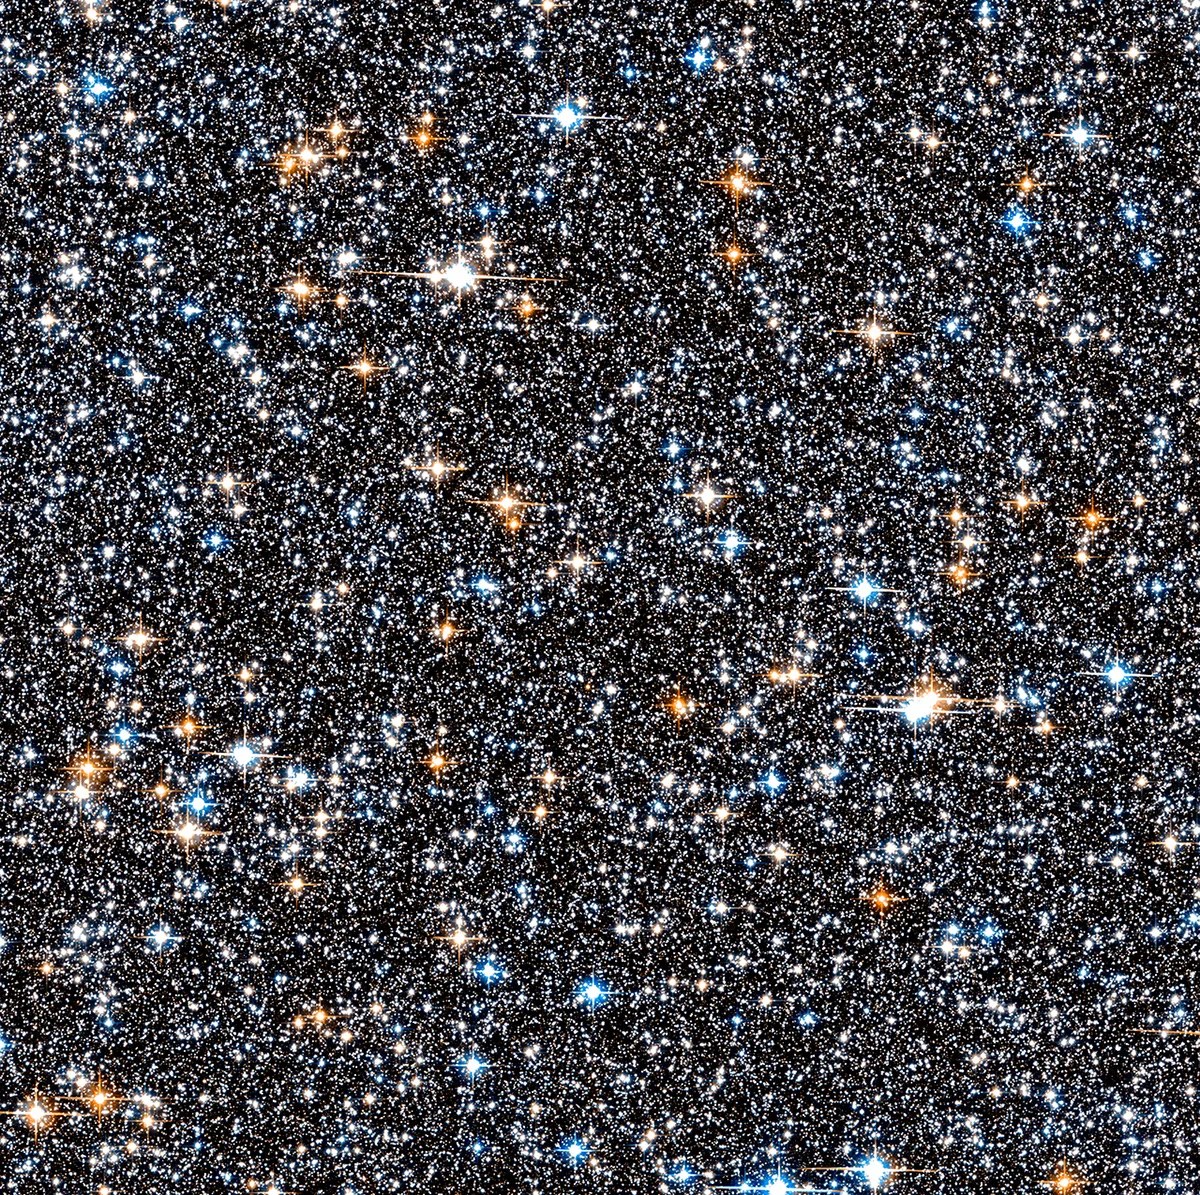 Small section of Hubble's view of the dense collection of stars crammed together in the galactic bulge.